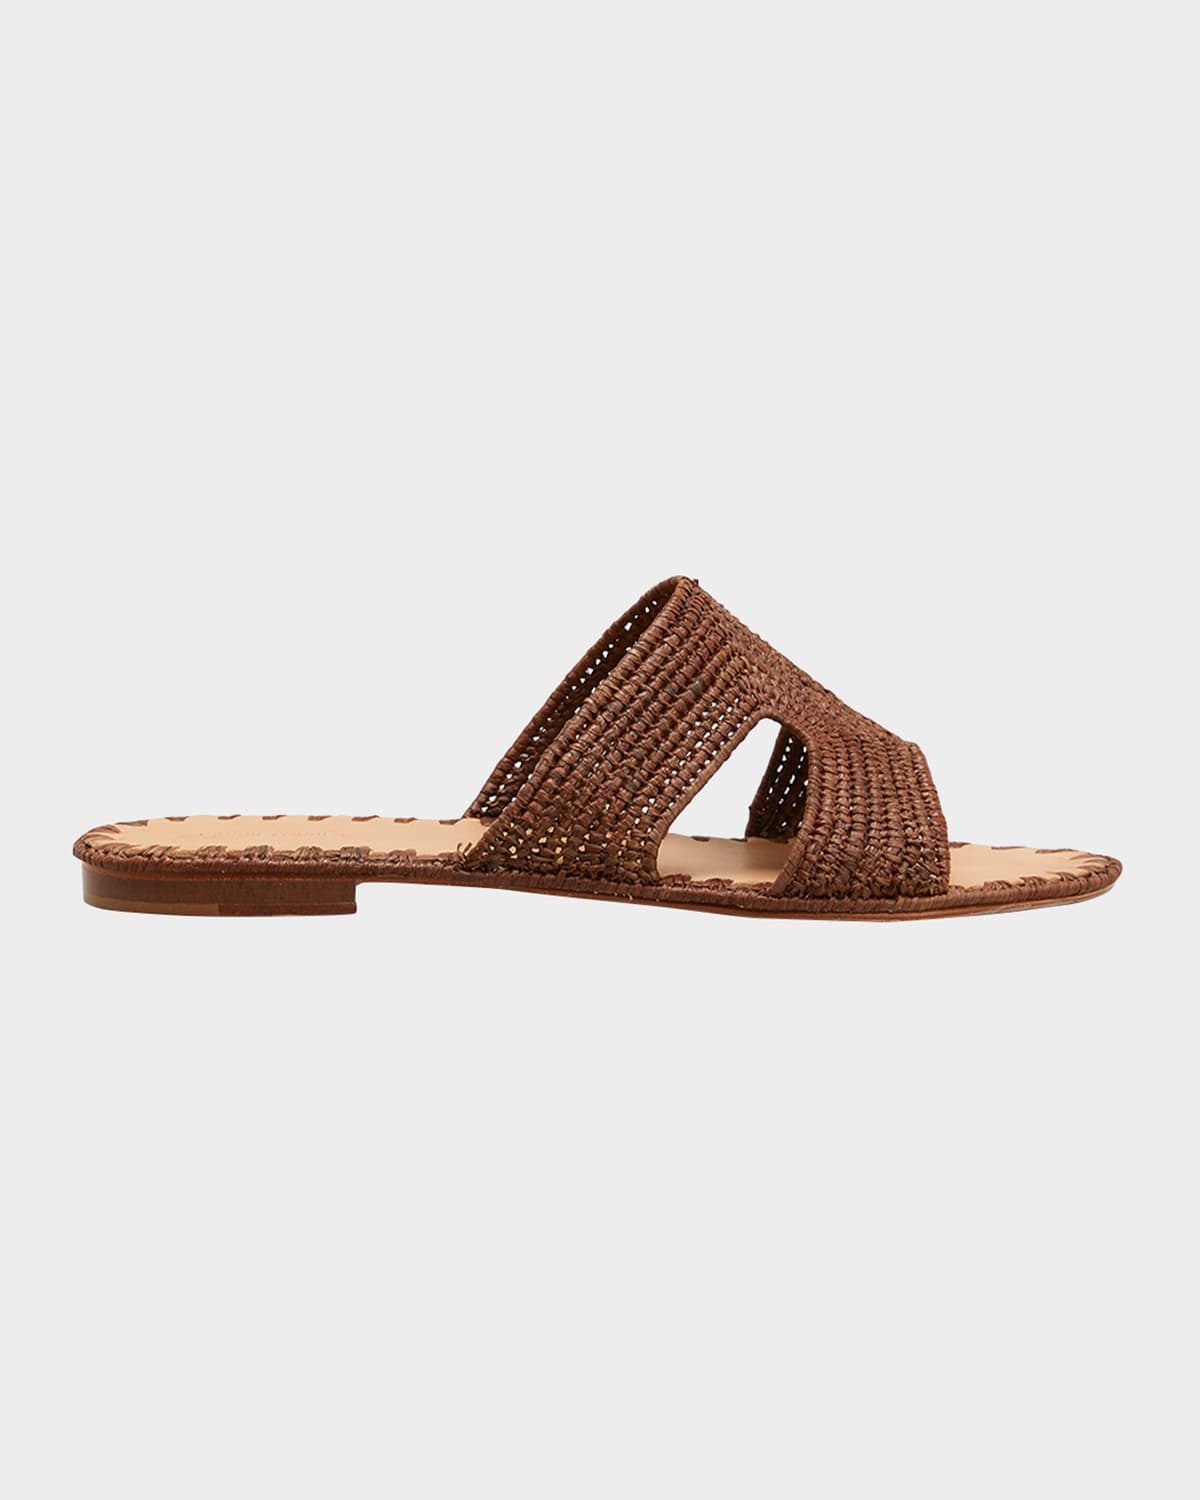 Carrie Forbes Cuadro Raffia Flat Slide Sandals In Cafe